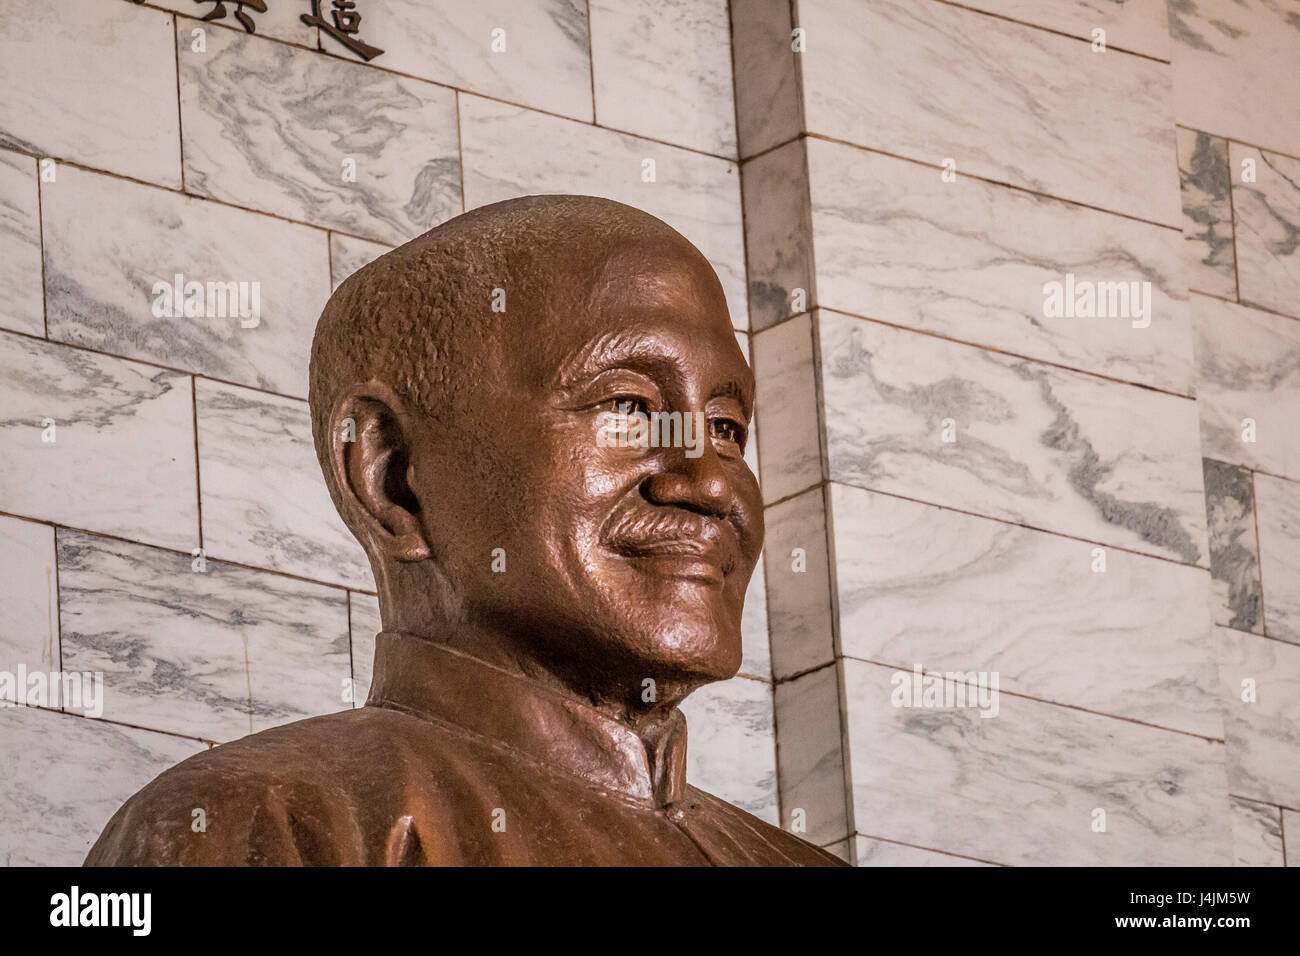 Close-up of the seated bronze statue of Chiang Kai-Shek at the Chiang Kai-Shek Memorial Hall in Taipei. Stock Photo